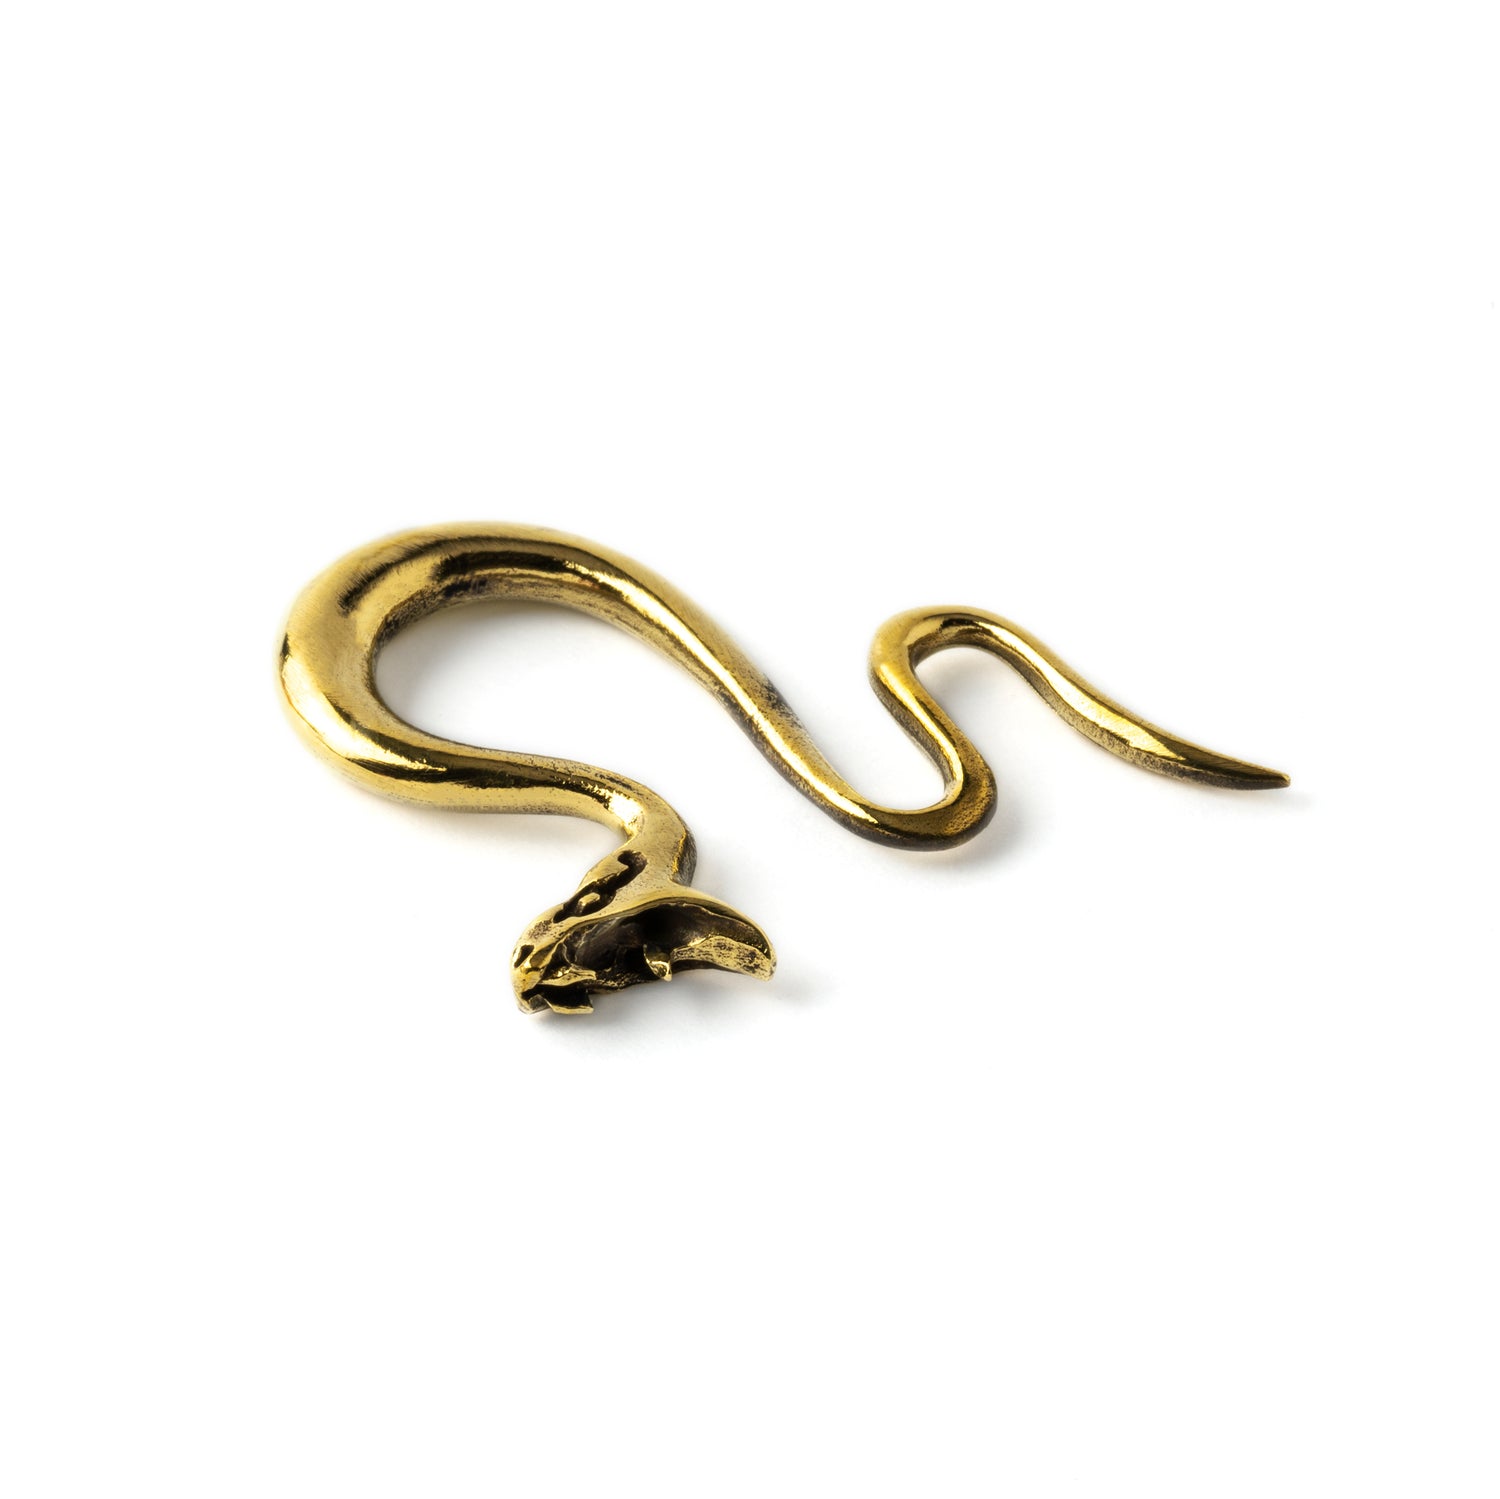 single gold brass serpent ear hangers stretchers for stretched ears frontal view